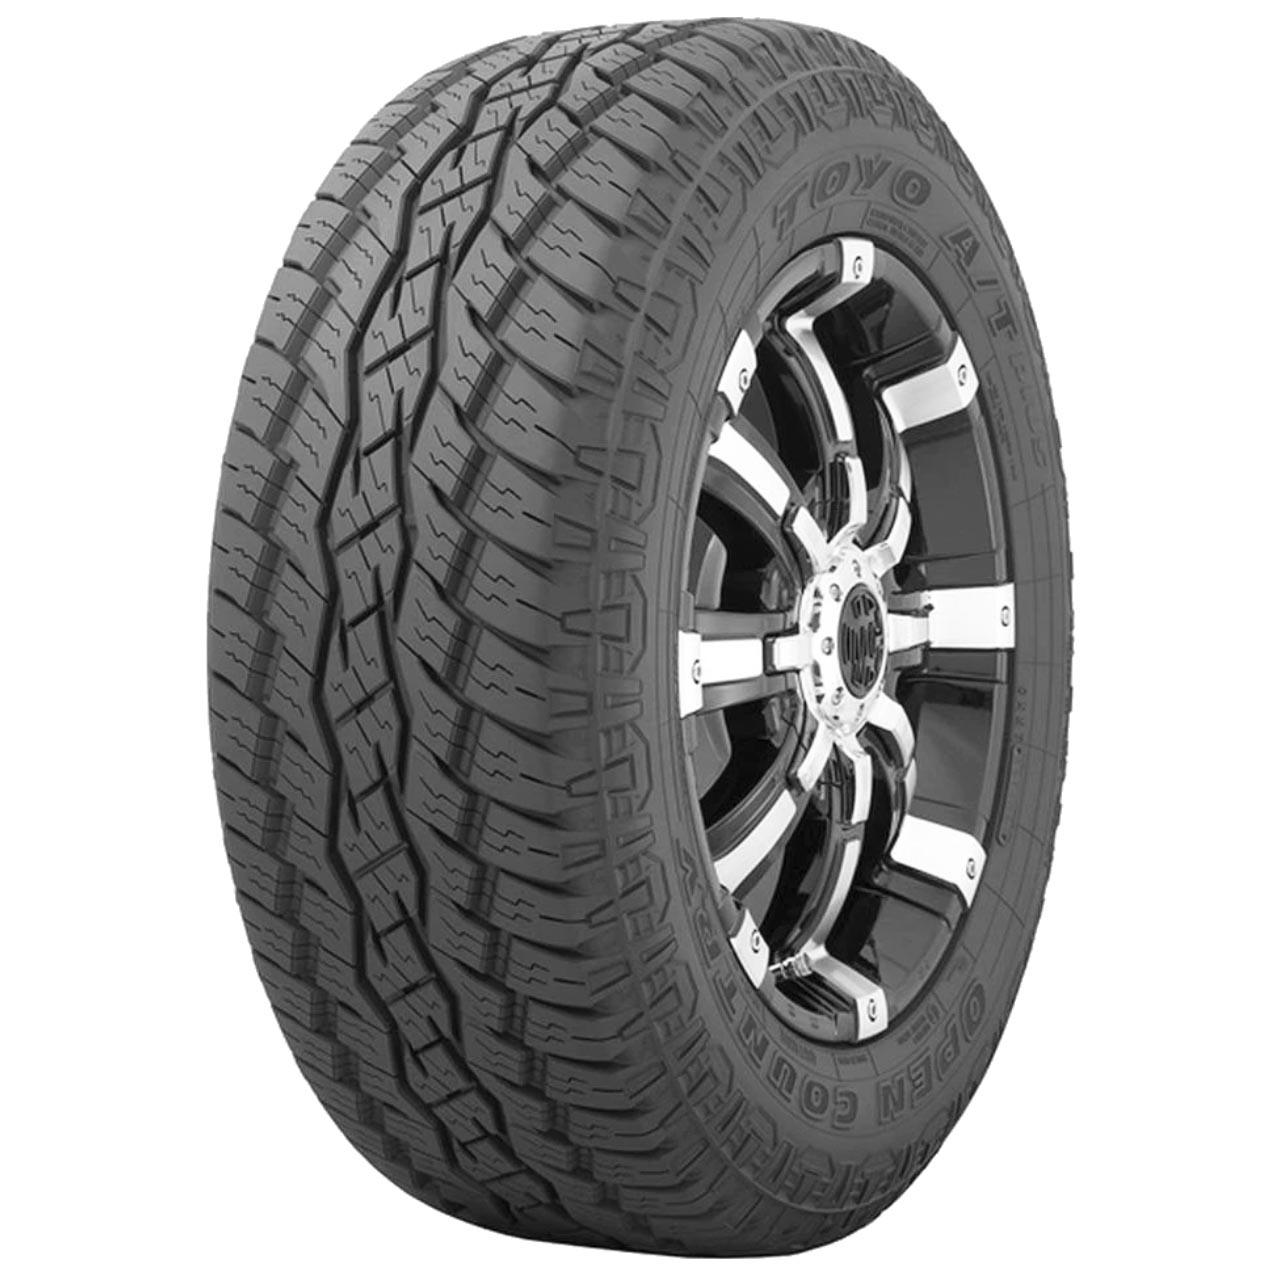 Toyo Open Country AT Plus 215/85R16C 115/112S